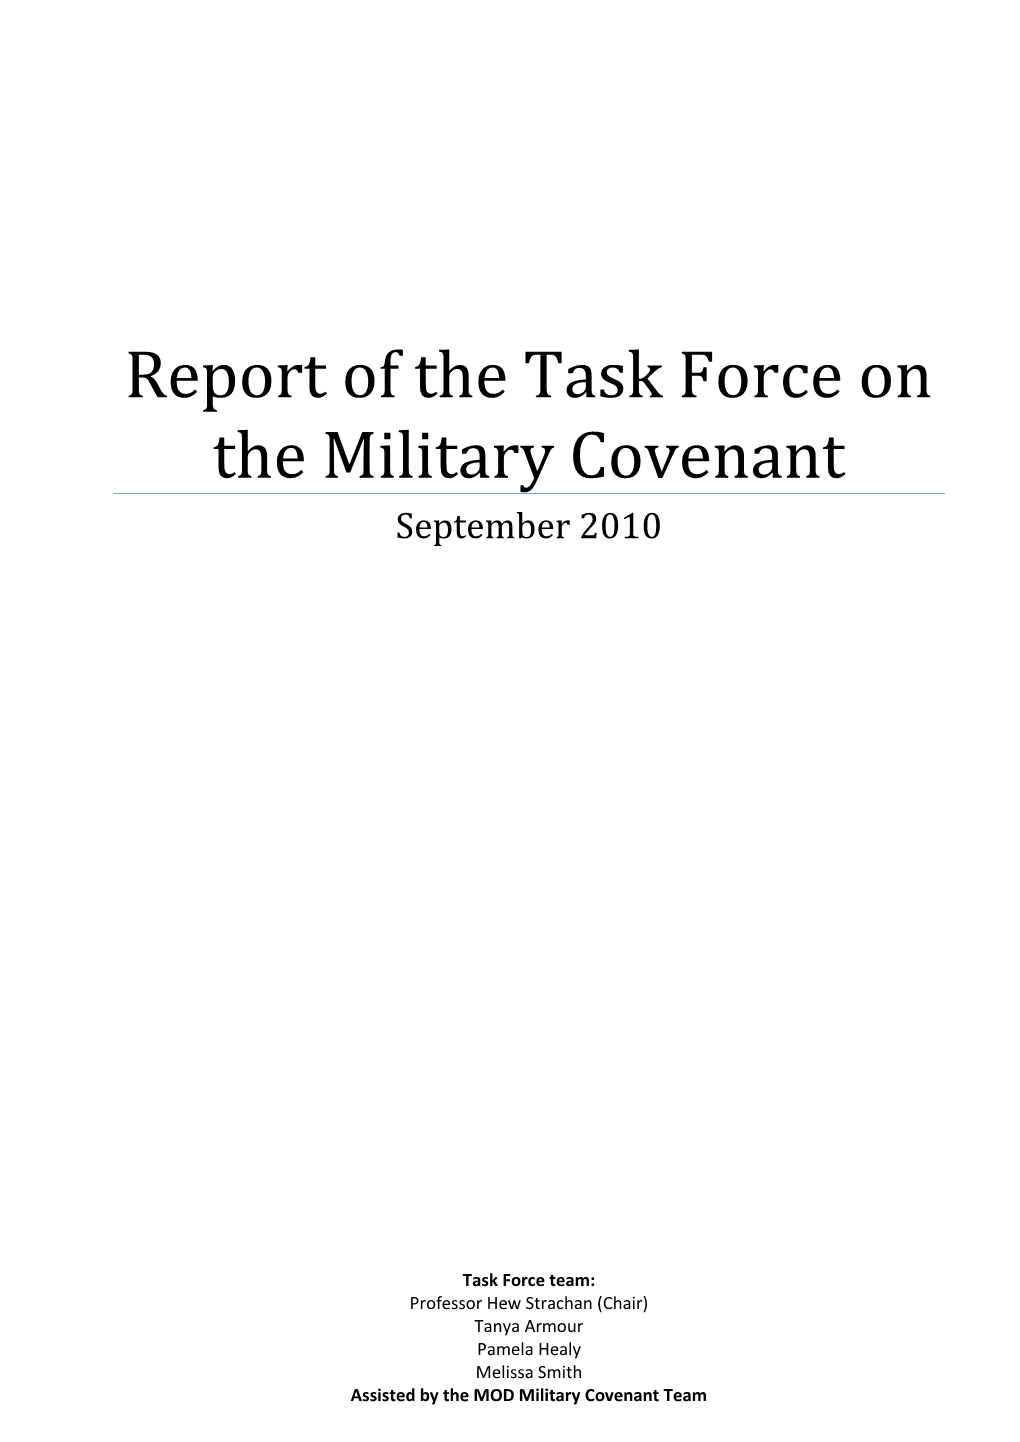 Report of the Task Force on the Military Covenant September 2010